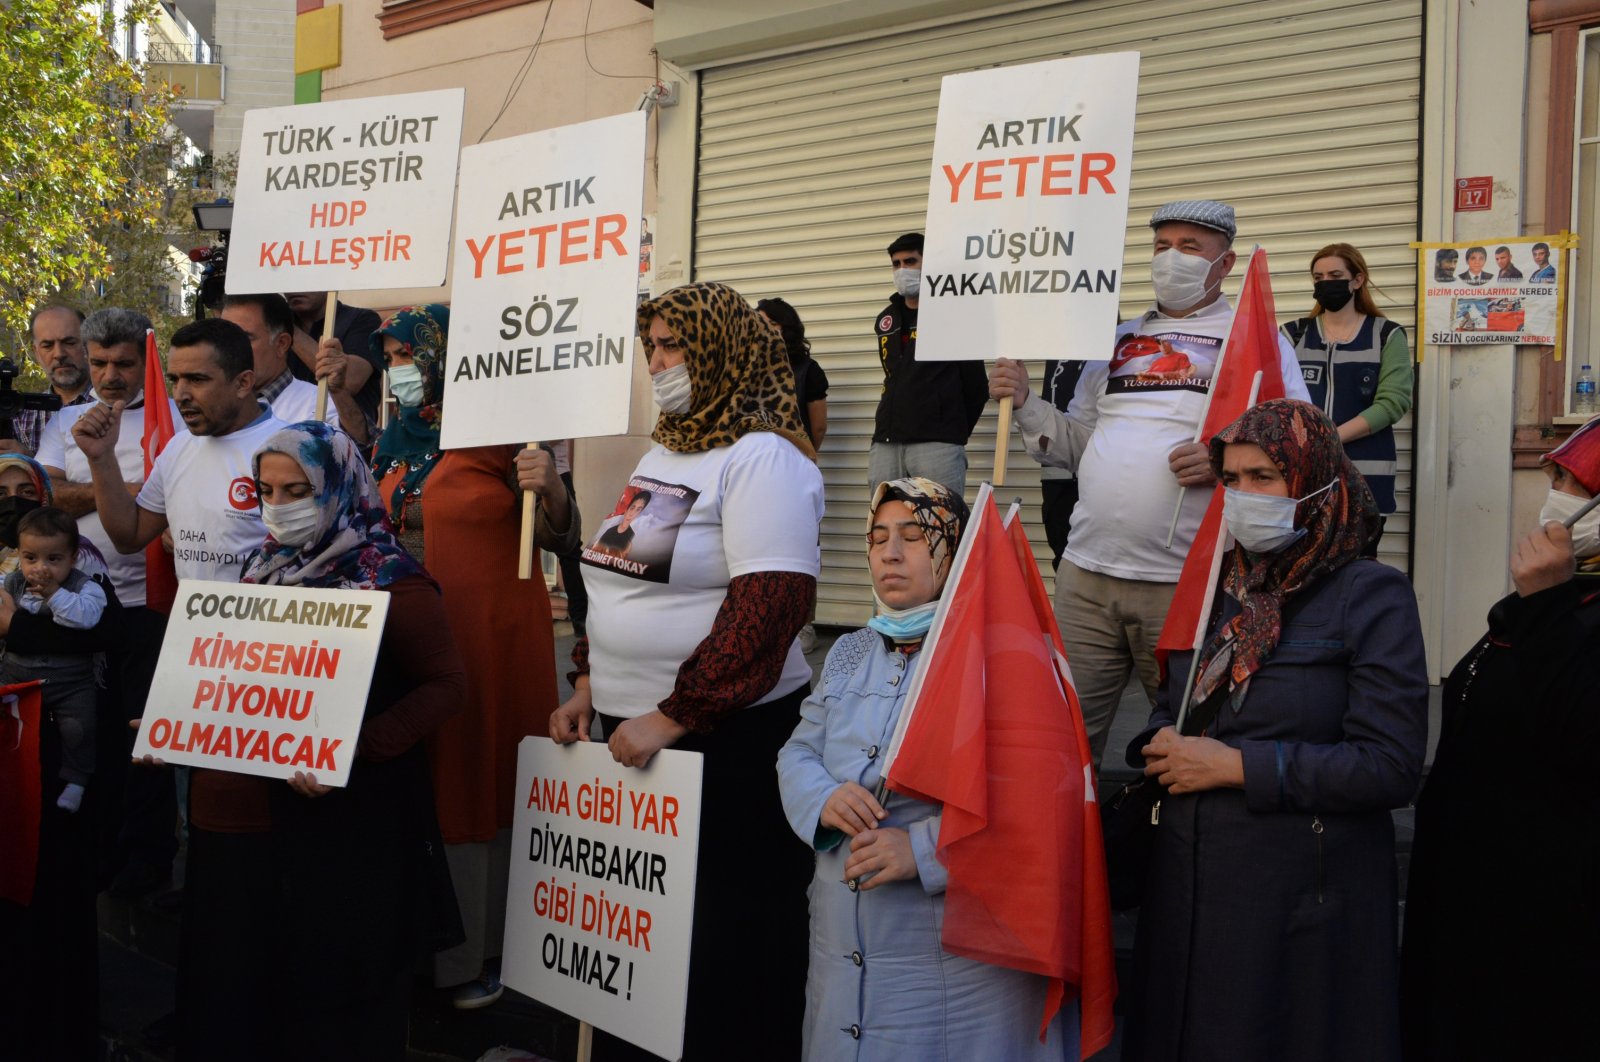 Parents hold placards condemning the PKK and the Peoples' Democratic Party (HDP) in front of HDP headquarters in Diyarbakır, Turkey, Oct. 10, 2021. (DHA File Photo)